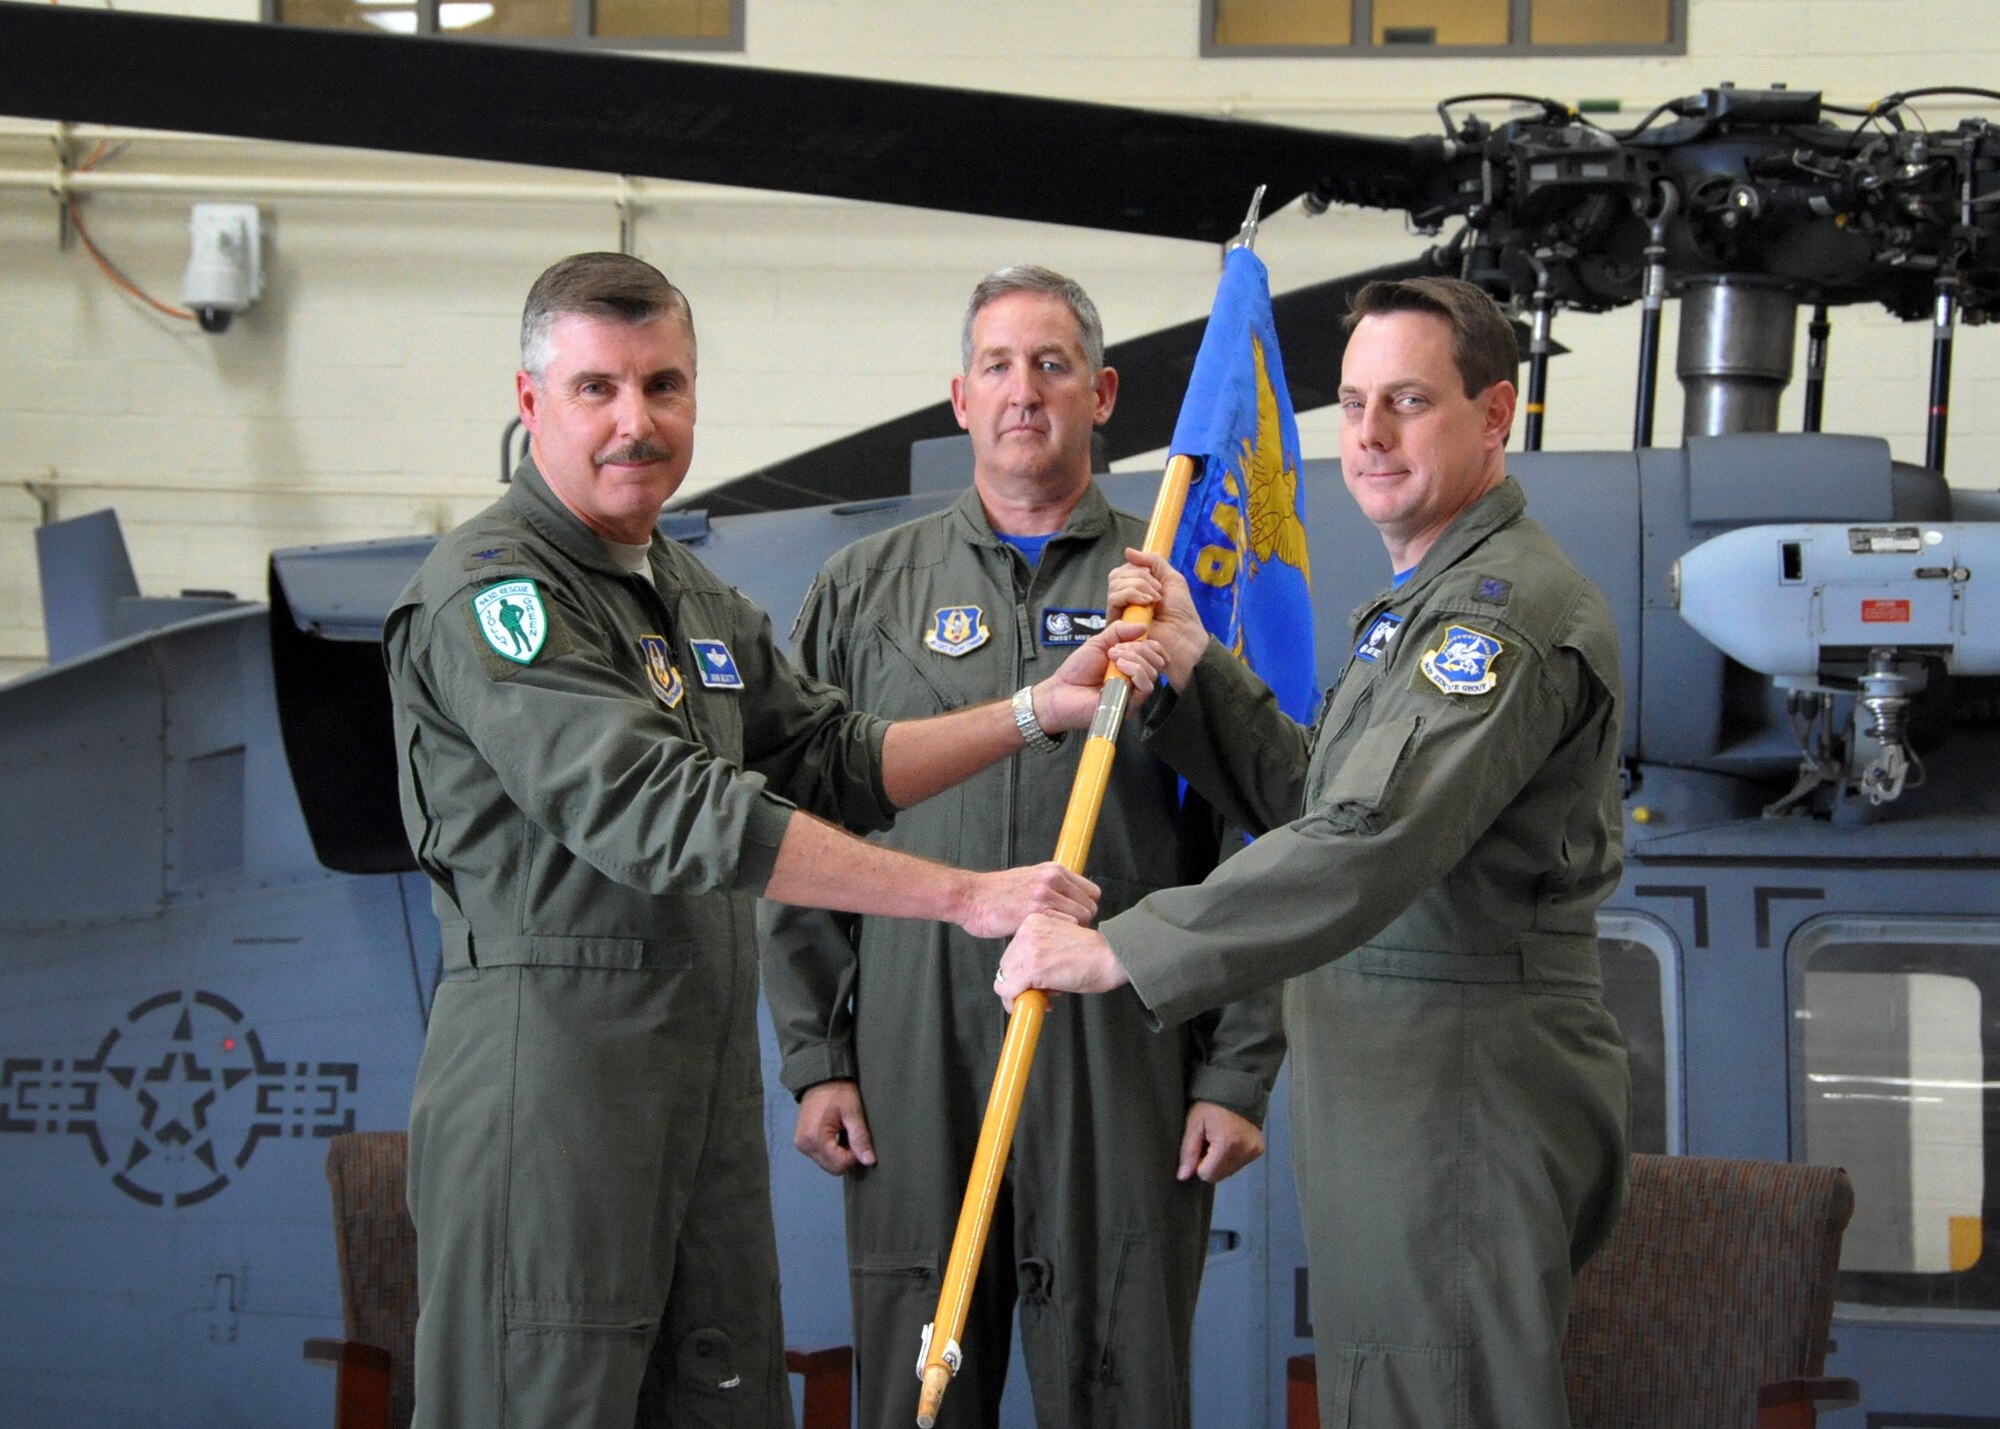 U.S. Air Force Reserve Lt. Col. Andrew Meshel, who formerly served as the 943rd Rescue Group deputy commander, accepts the 305th Rescue Squadron guidon from Col. John Beatty, the group commander, during an assumption of command ceremony at Davis-Monthan Air Force Base, Ariz., April 3.